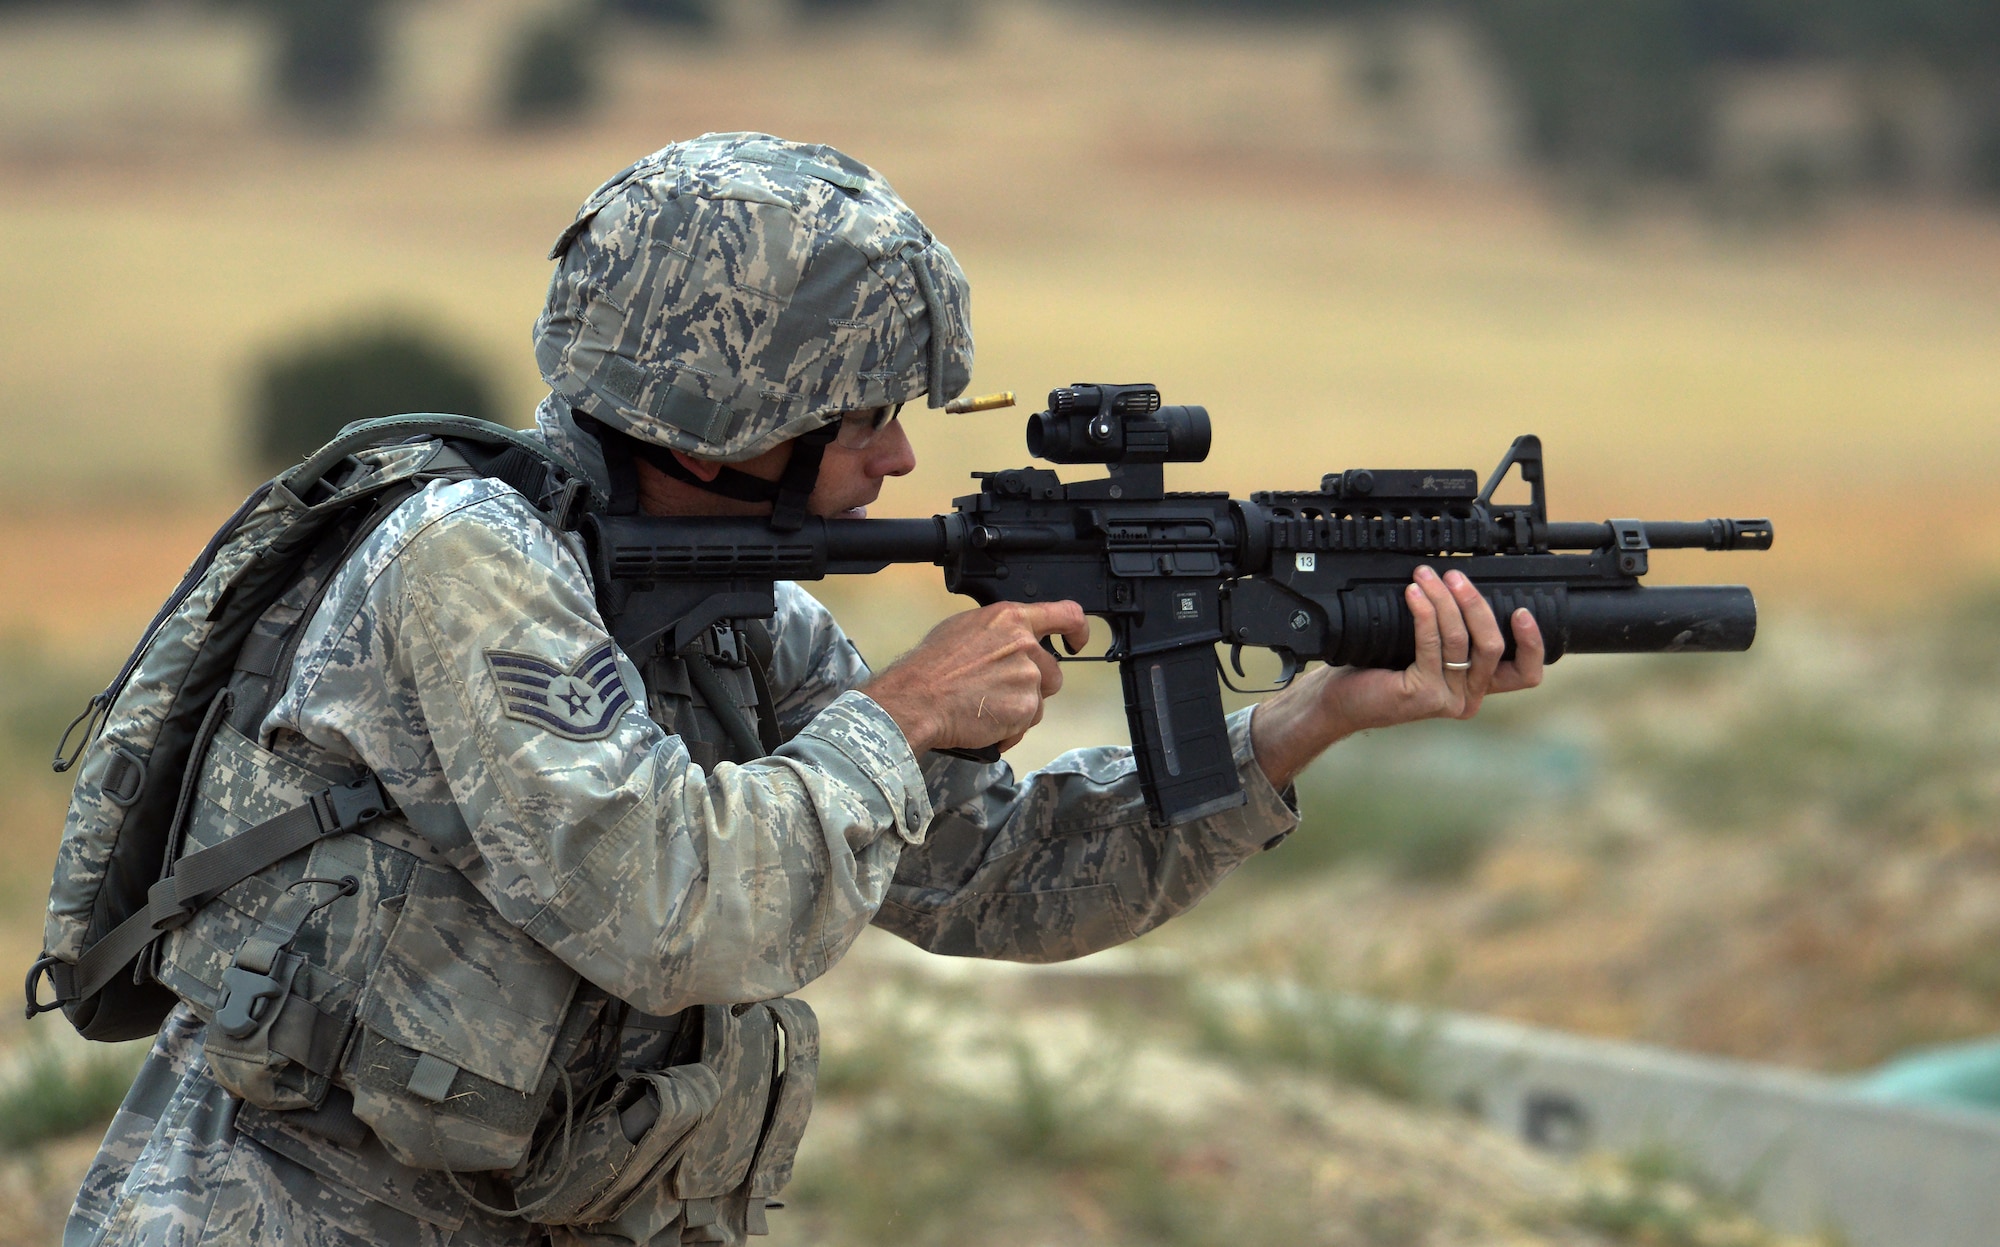 Staff Sgt. Nathan Warren, 28th Bomb Wing, Ellsworth Air Force Base, S.D., fires an M-4 assault rifle at a target during the shooting range portion of the 2015 Global Strike Challenge security forces competition on Camp Guernsey, Wyo., Sept. 23, 2015. Competitors scored points based on the number of targets hit as well as how quickly they finished the course. (U.S. Air Force photo by Senior Airman Brandon Valle)